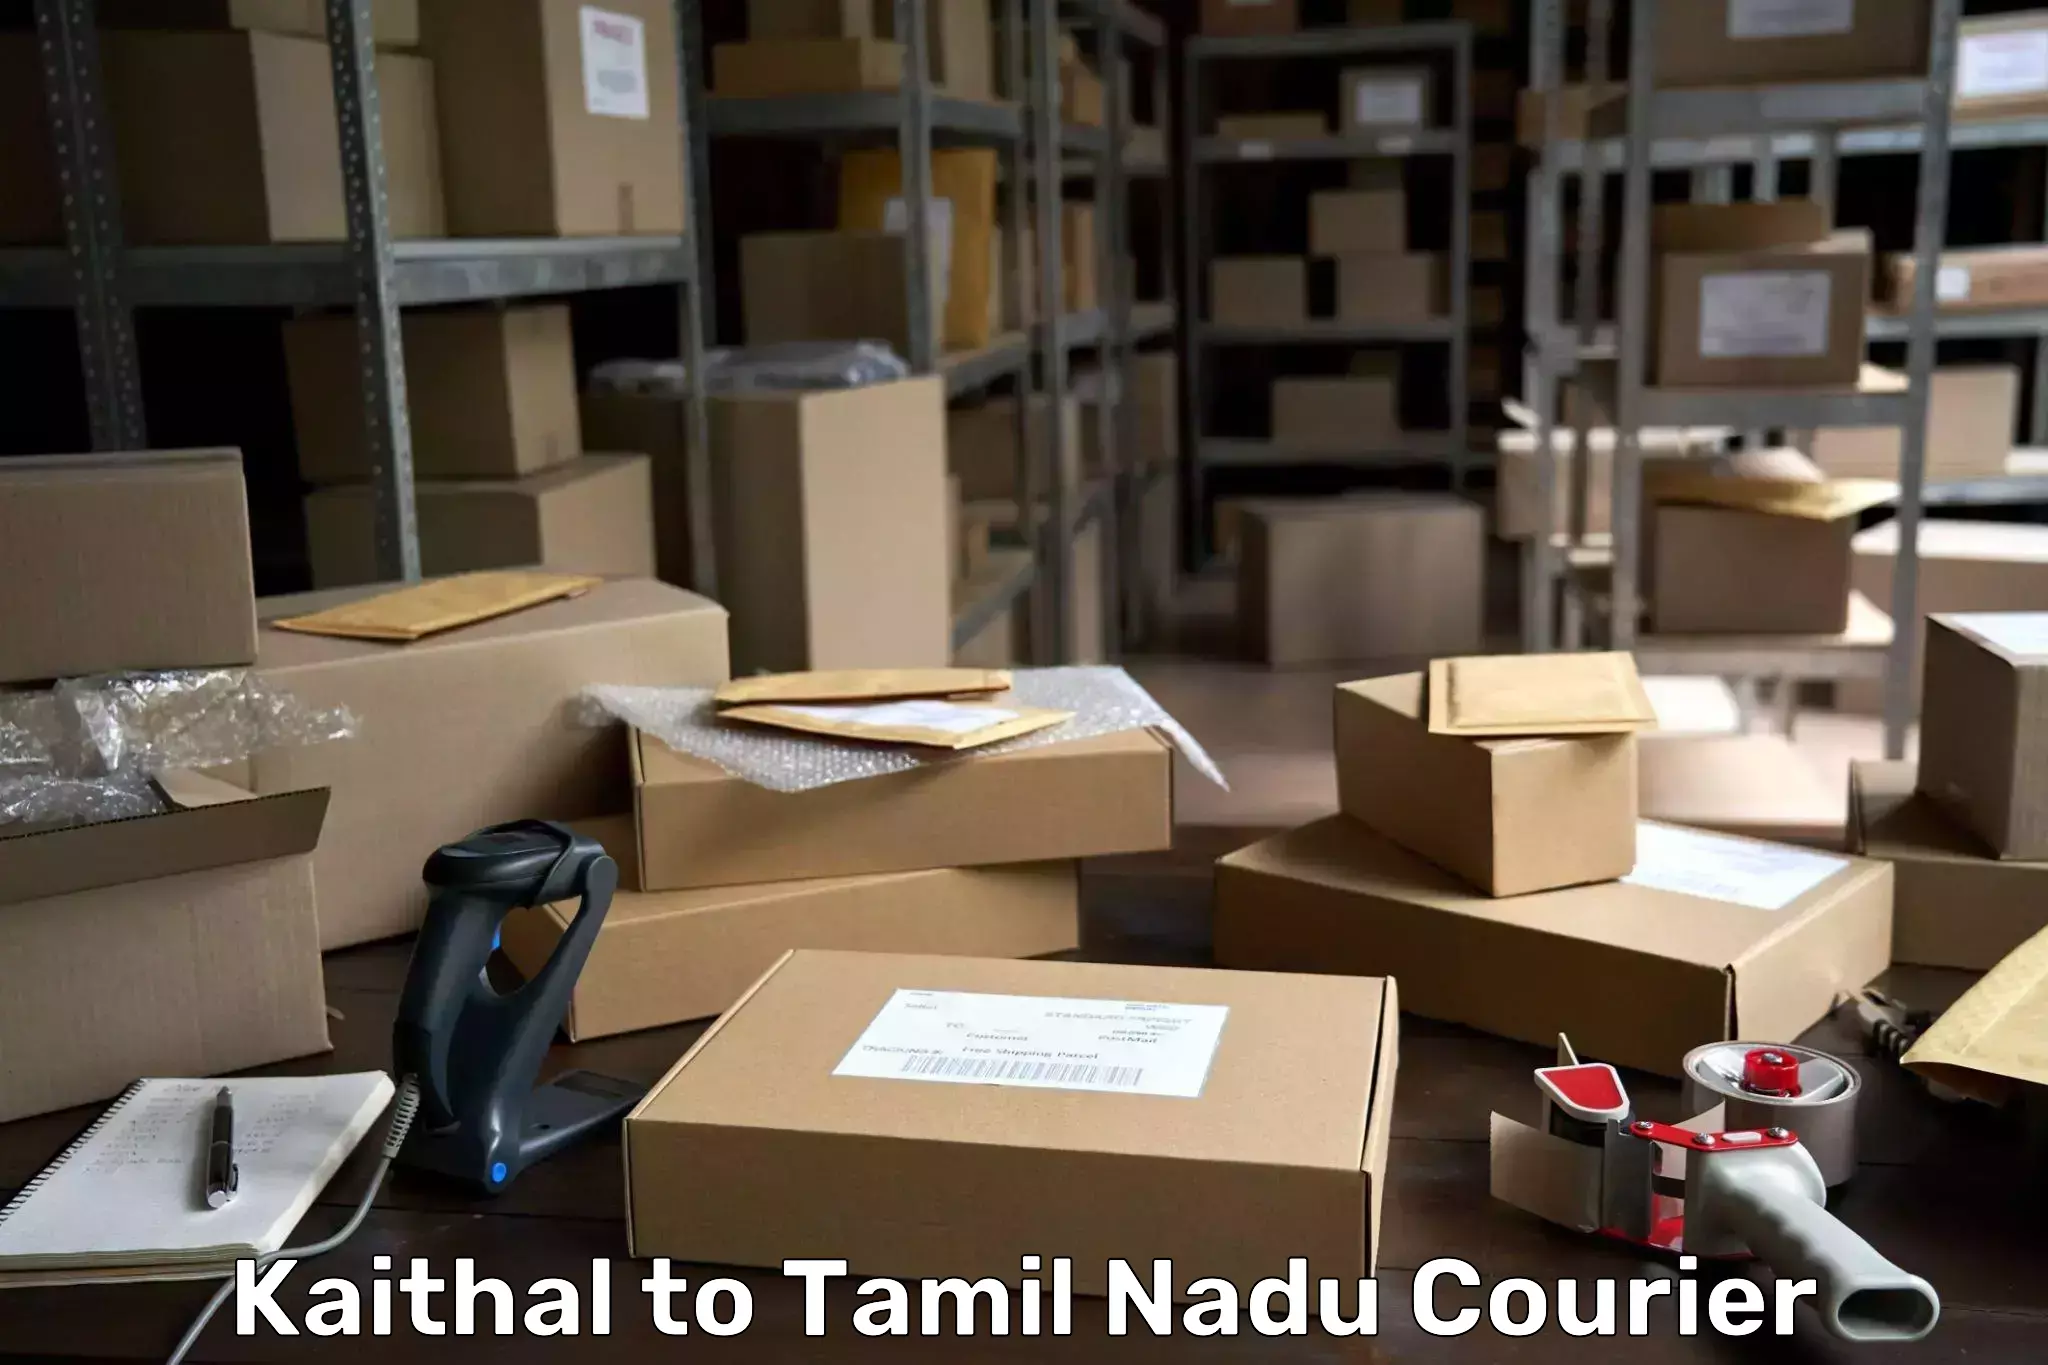 Nationwide parcel services Kaithal to Sivaganga